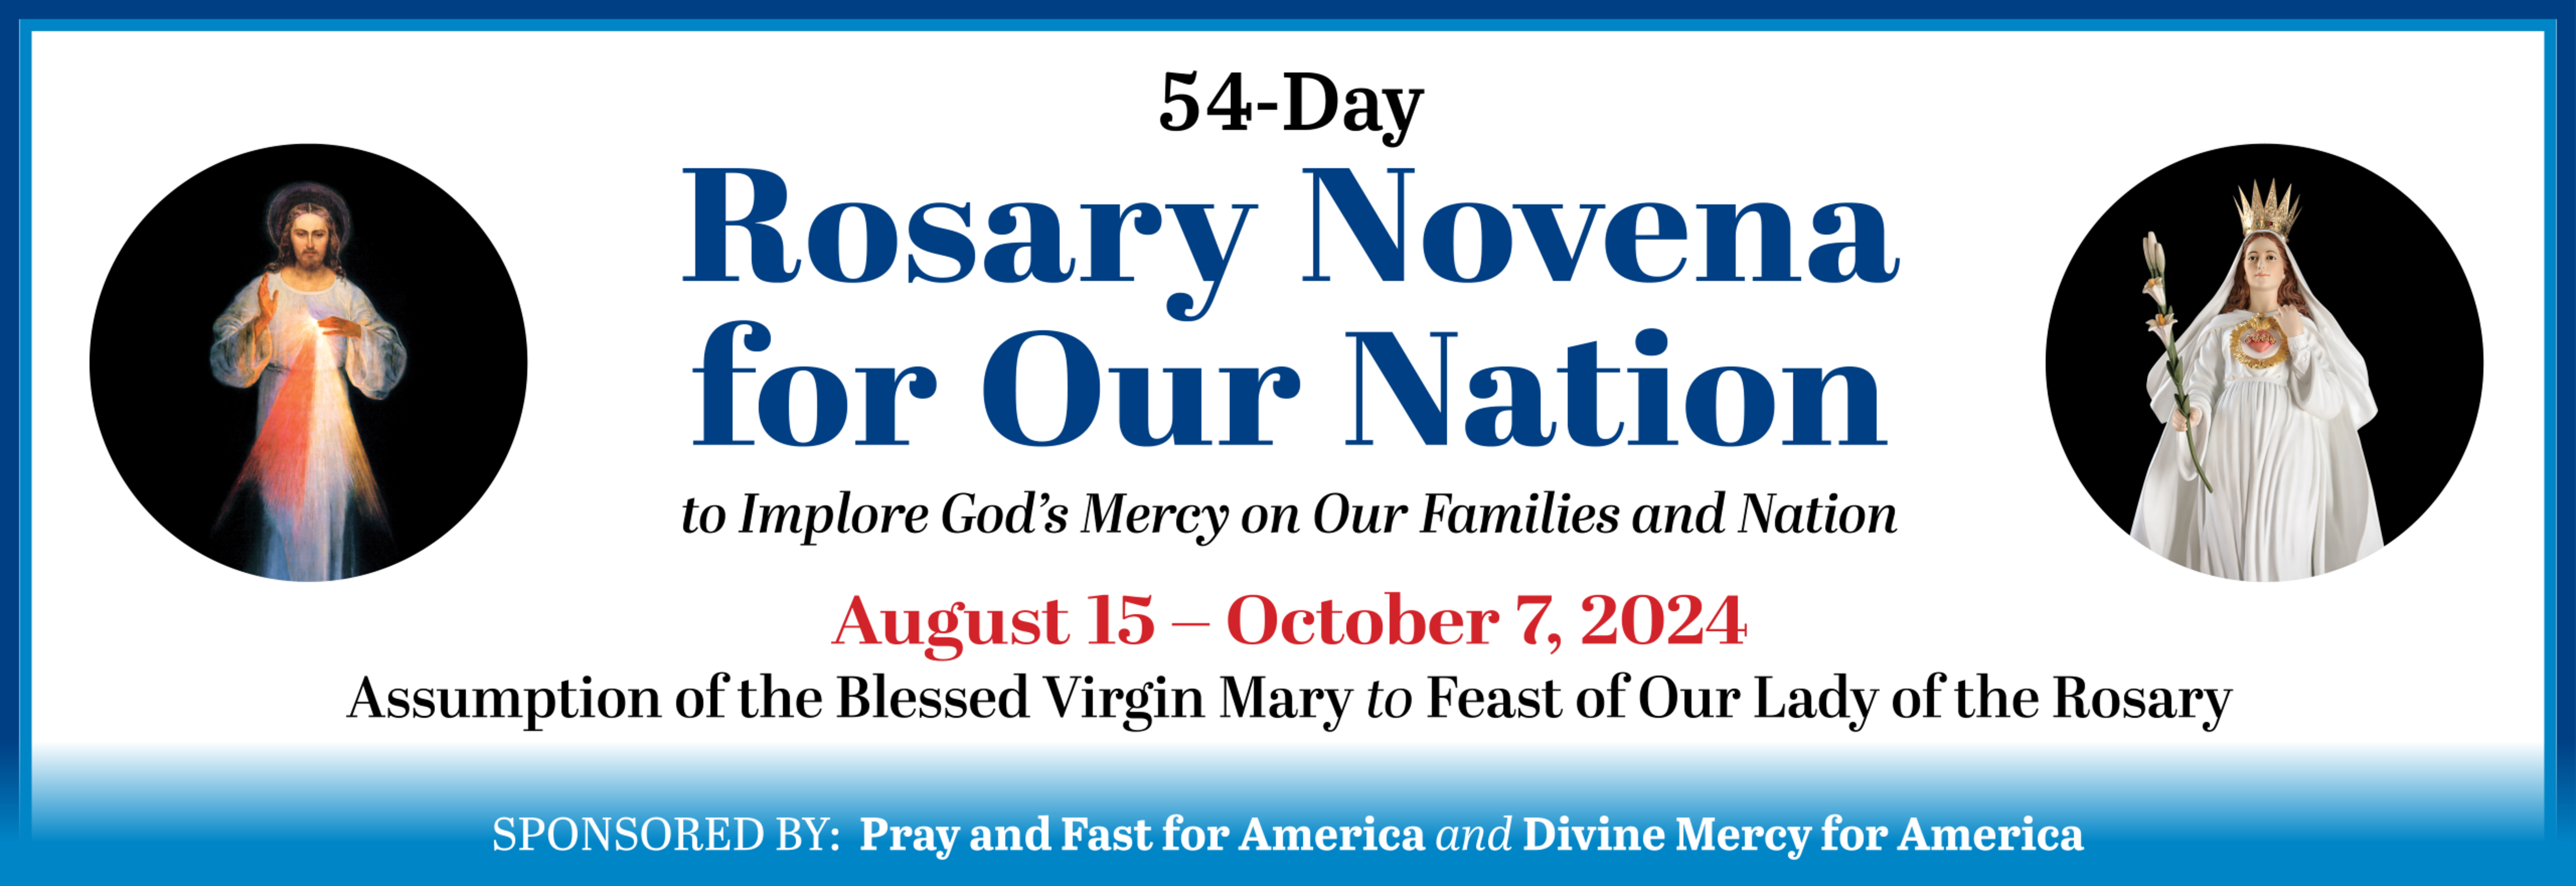 Rosary for Our Nation - Aug 15 - Oct 7-2024